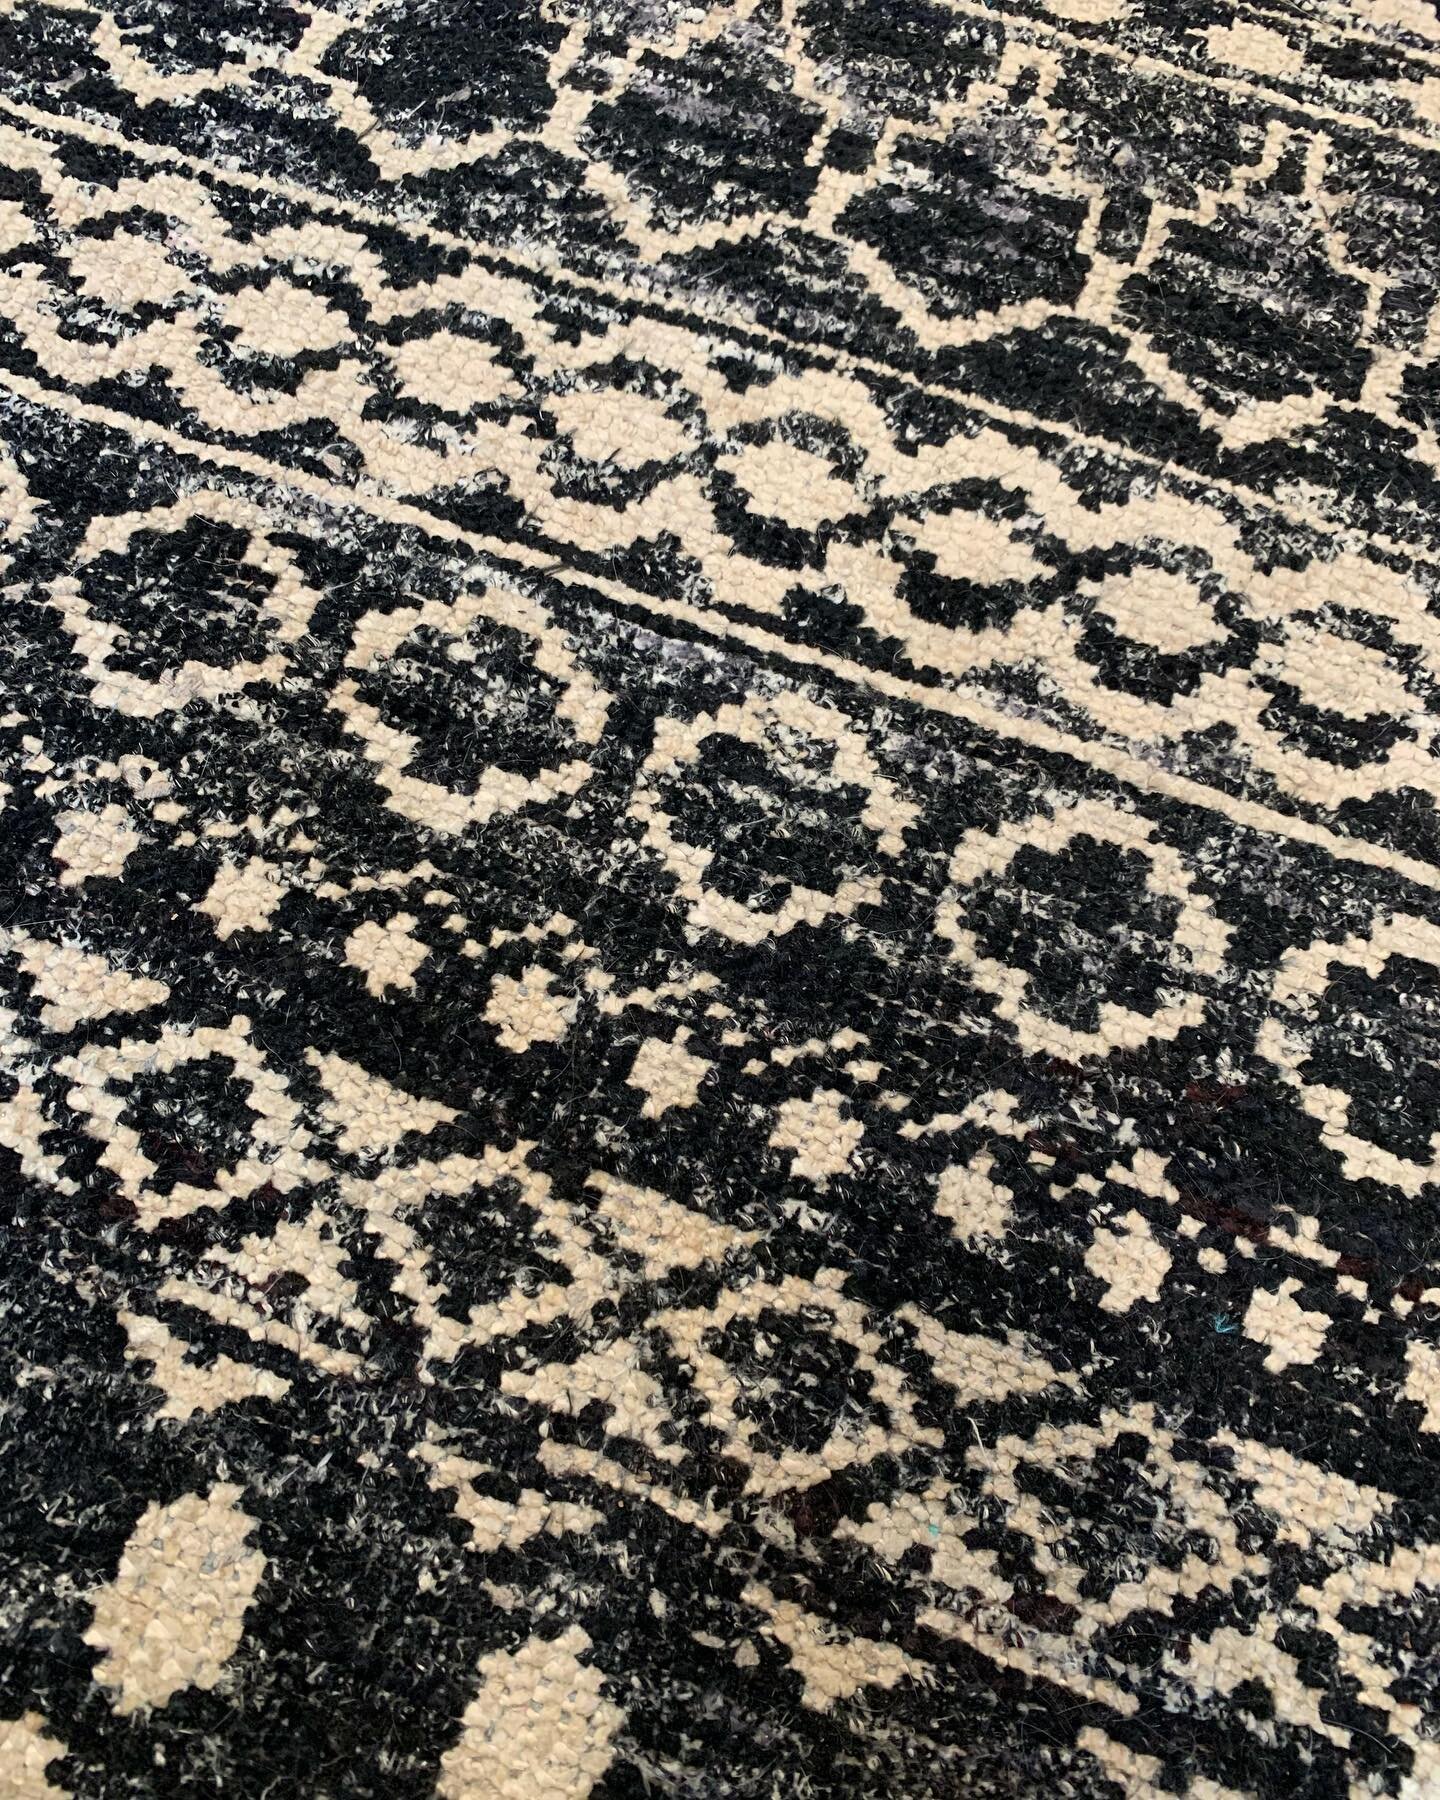 I&rsquo;m sitting still for the first time in weeks. 

I&rsquo;ve found myself mesmerized by the pattern of this rug. 

My body and brain are tired. 

We&rsquo;ve just wrapped up the school year (a HS sophomore and a homeschool year for the HS junior